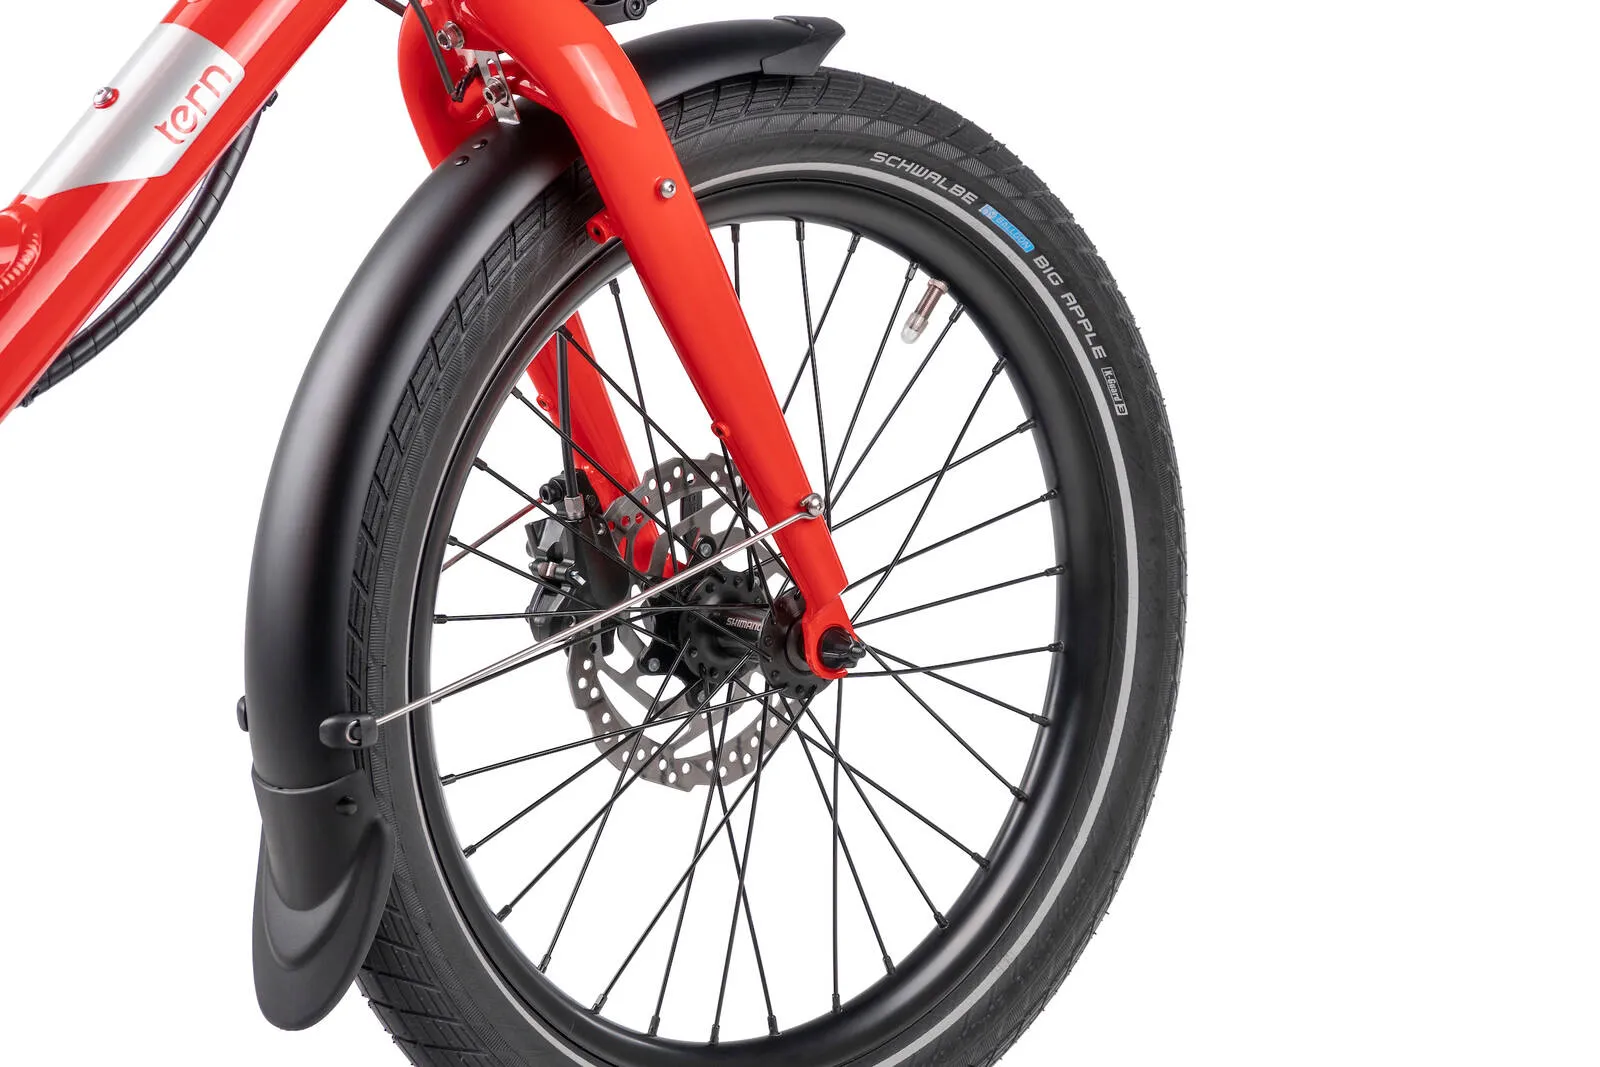 Close-up detail of Tern Quick Haul P9 front wheel